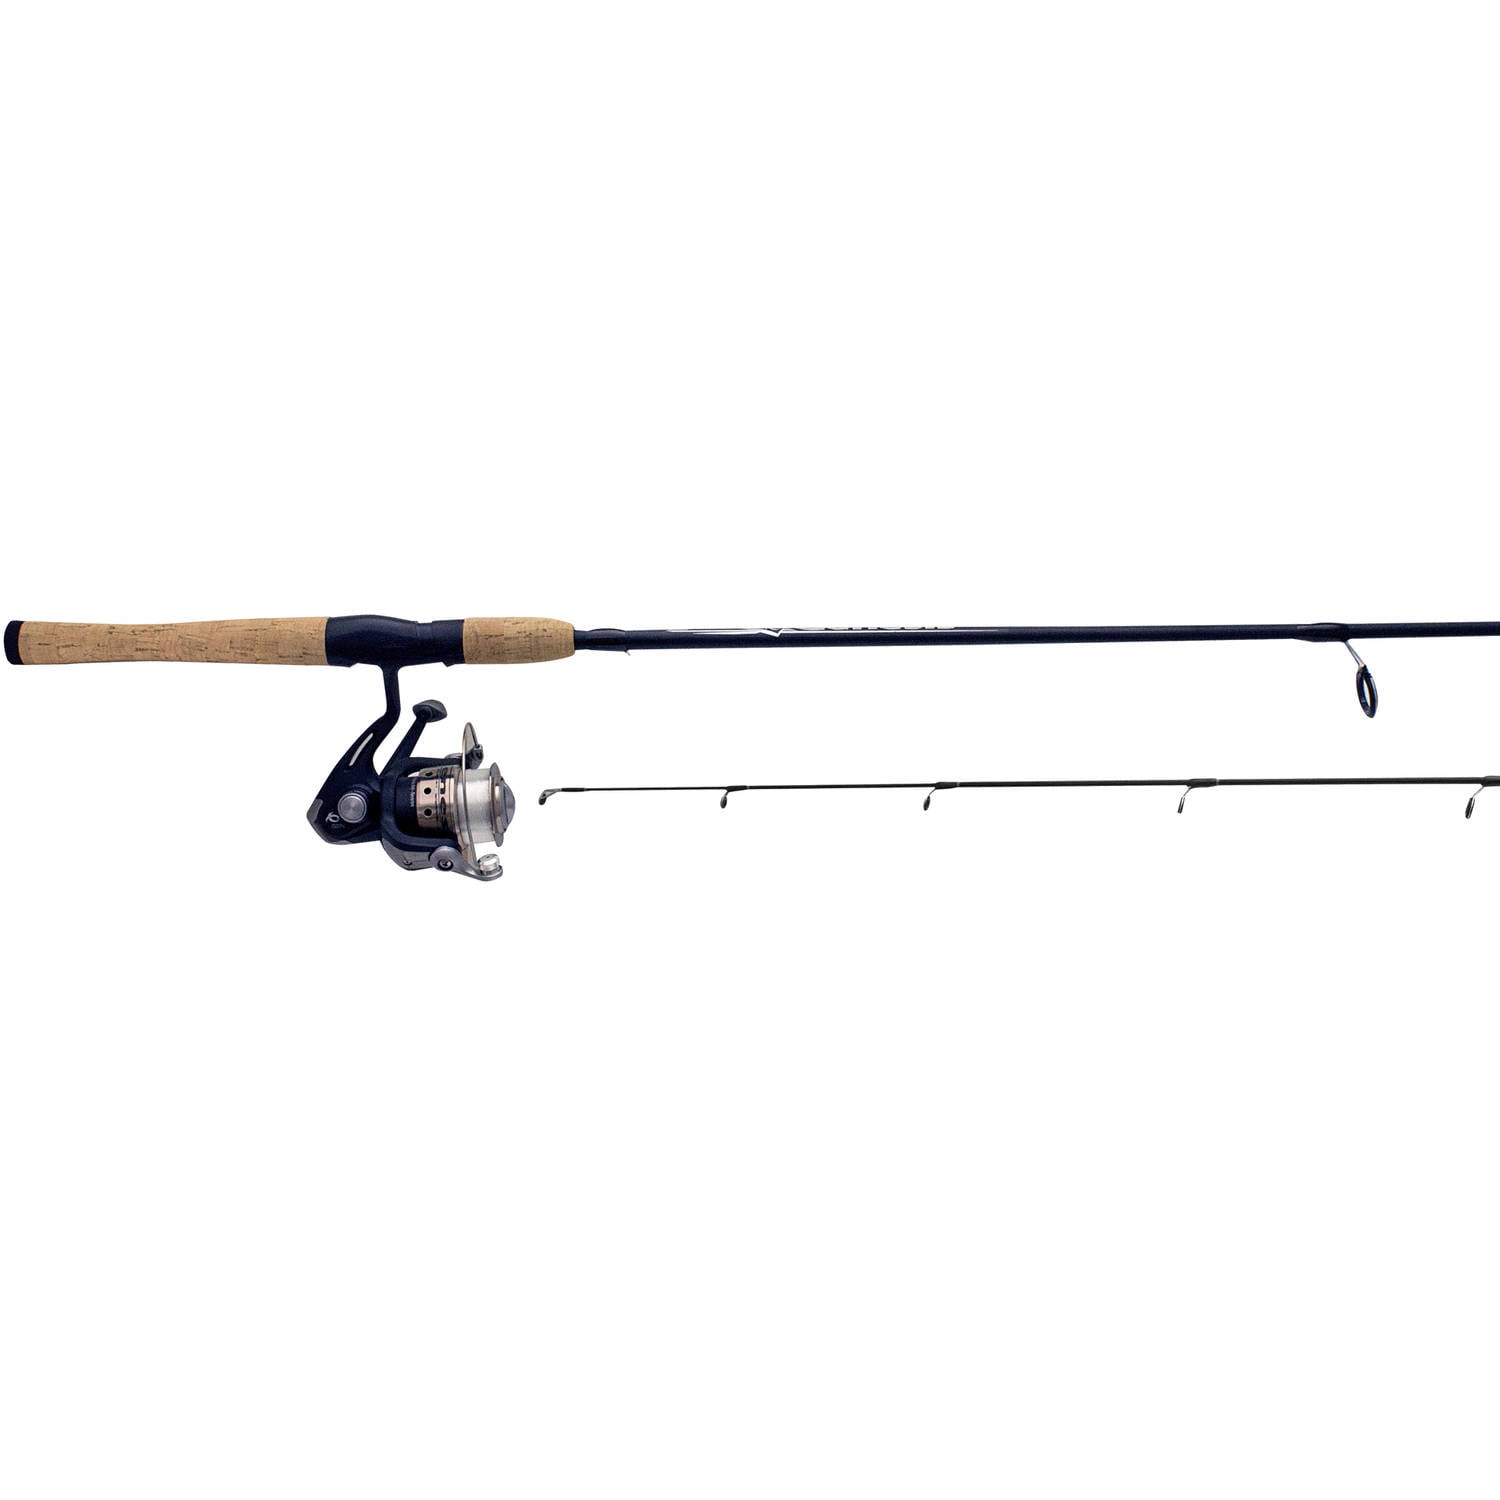 Zebco Genesis 6' 6" Synchronized Performance Spinning Reel & Fishing Rod Combo for sale online 